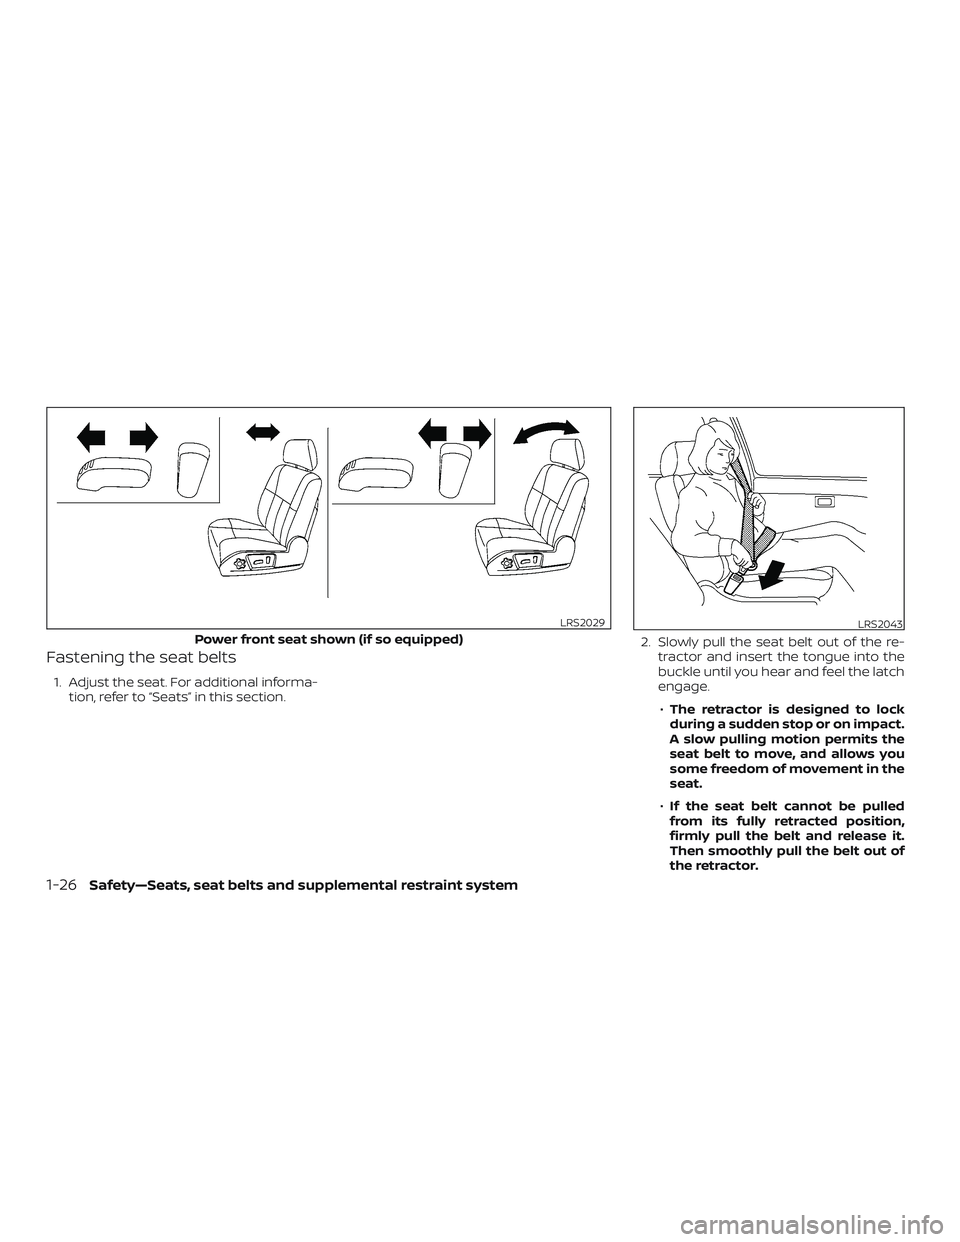 NISSAN NV PASSENGER VAN 2018 Service Manual Fastening the seat belts
1. Adjust the seat. For additional informa-tion, refer to “Seats” in this section. 2. Slowly pull the seat belt out of the re-
tractor and insert the tongue into the
buckl